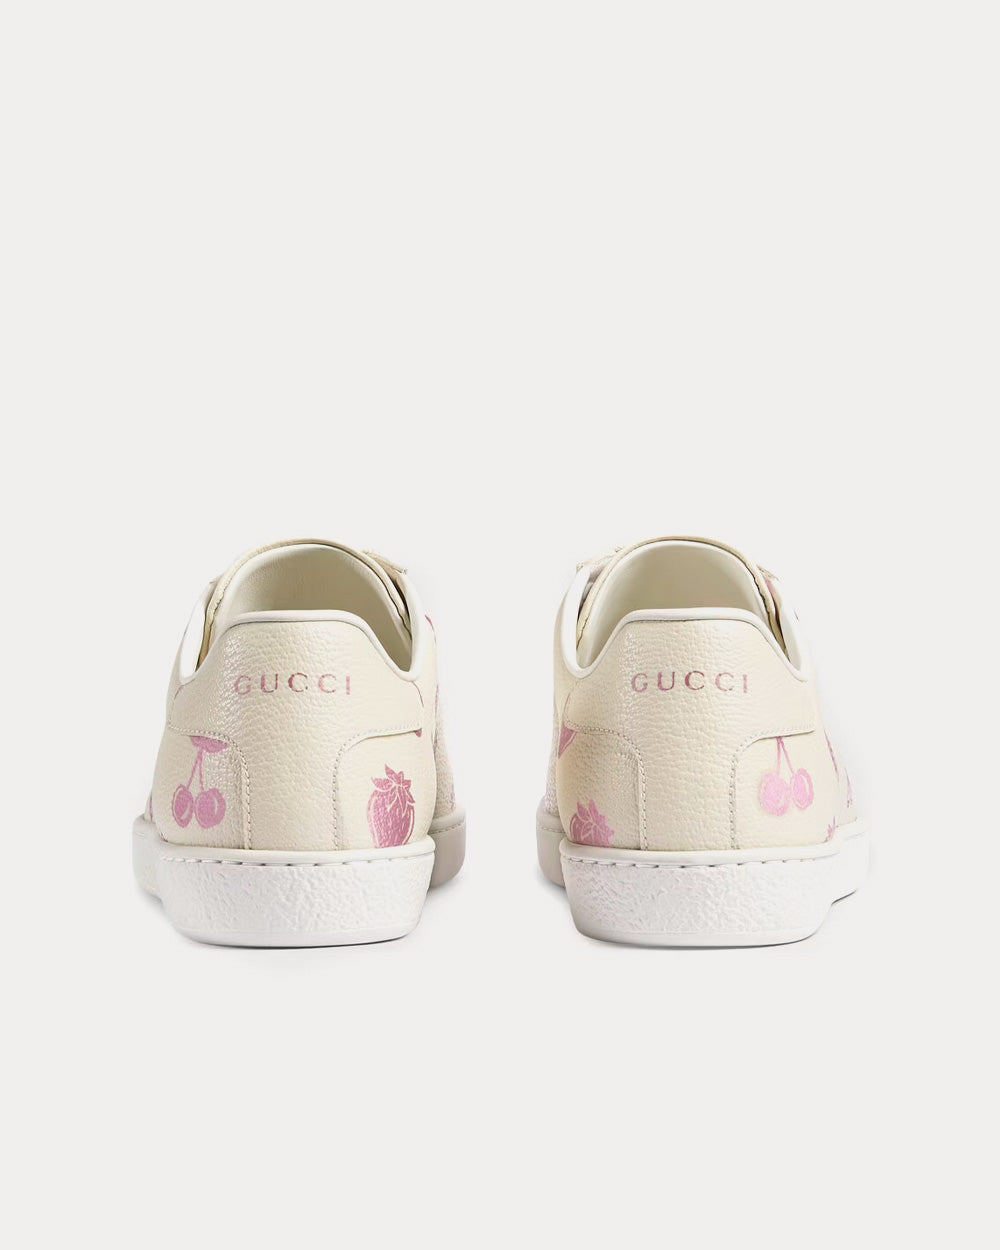 Gucci - Ace Metallic Strawberry & Cherry Print White Low Top Sneakers